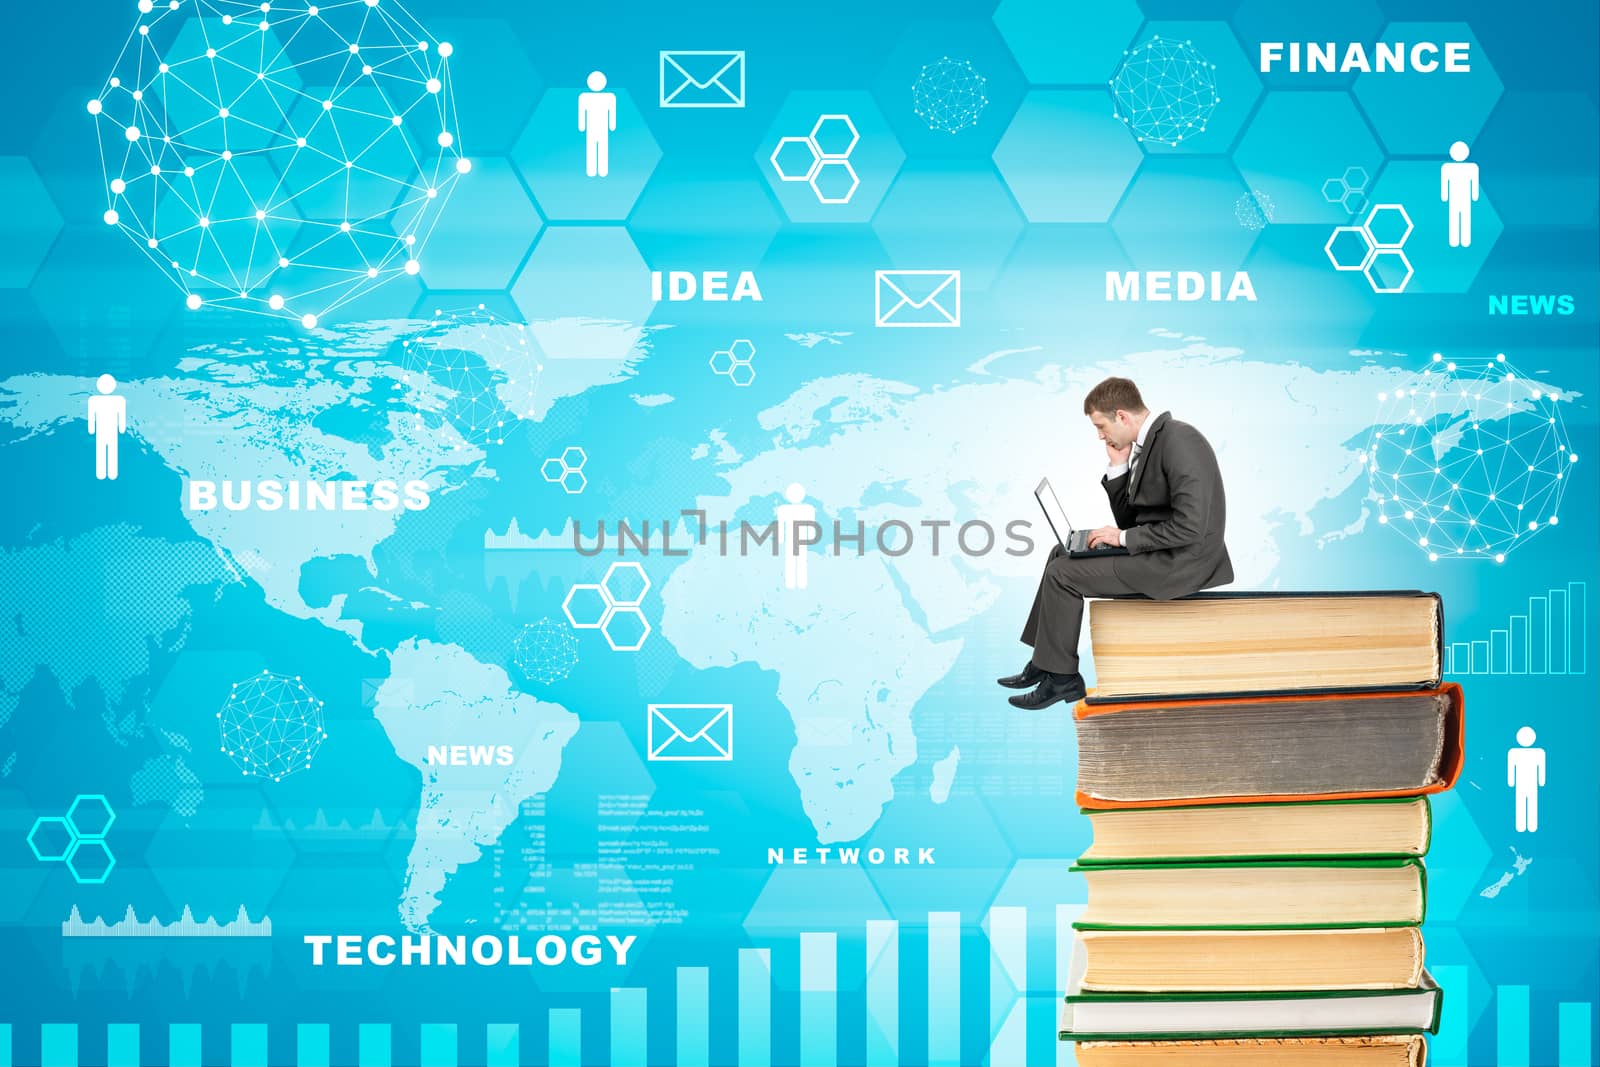 Businessman with laptop sitting on stack of books on blue background with world map